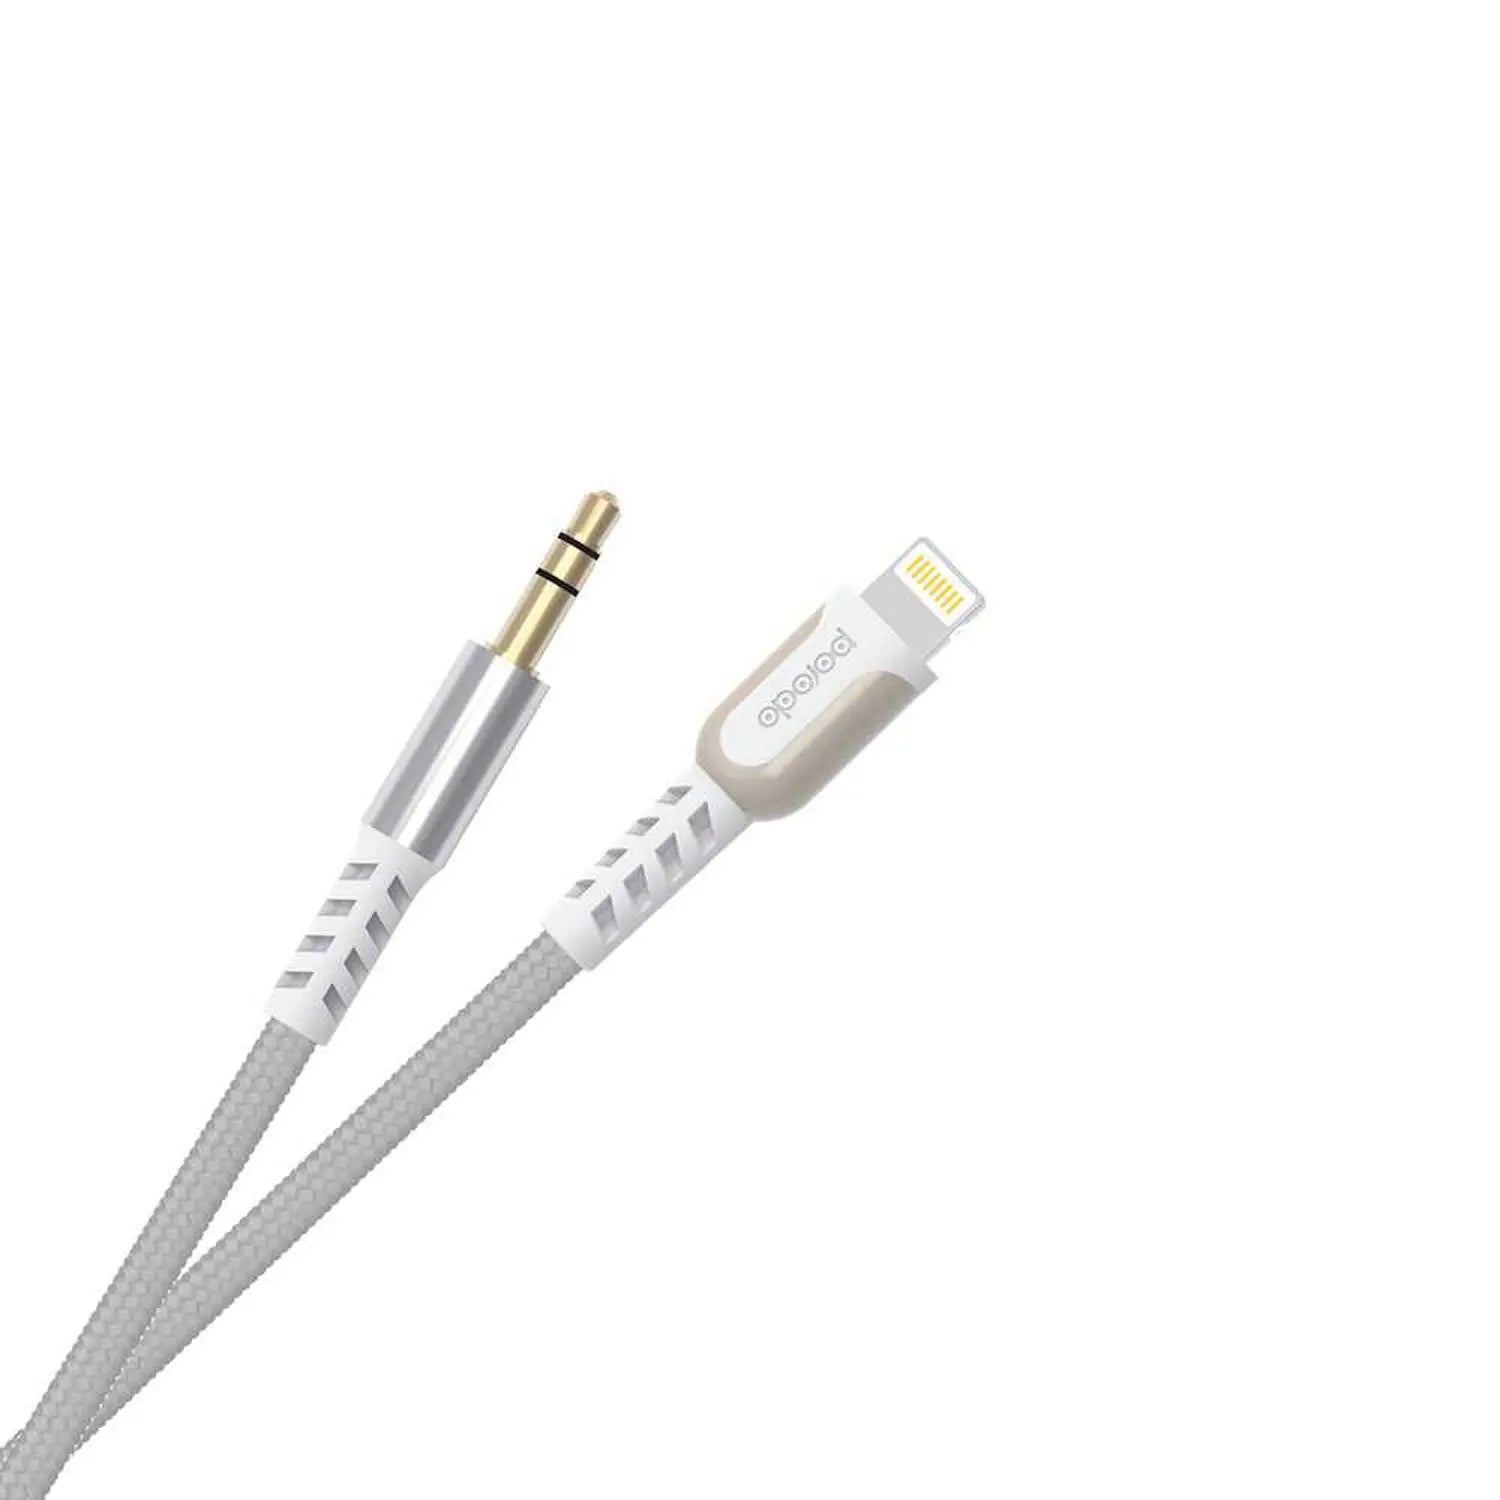 Porodo Metal Braided Lightning to AUX Cable 1.2M - White